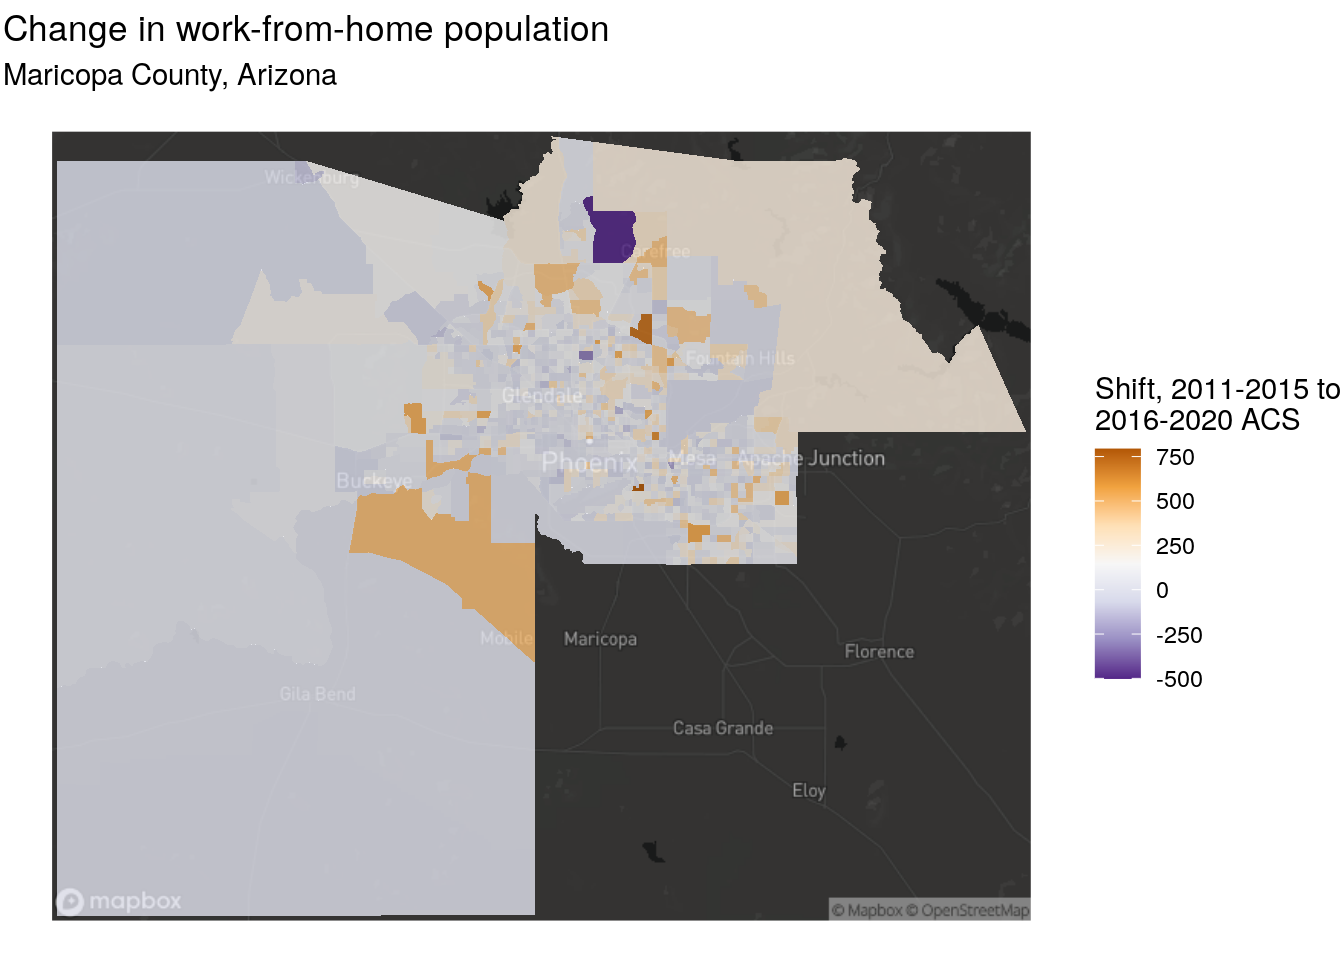 Map of shift in workers from home, Maricopa County Arizona